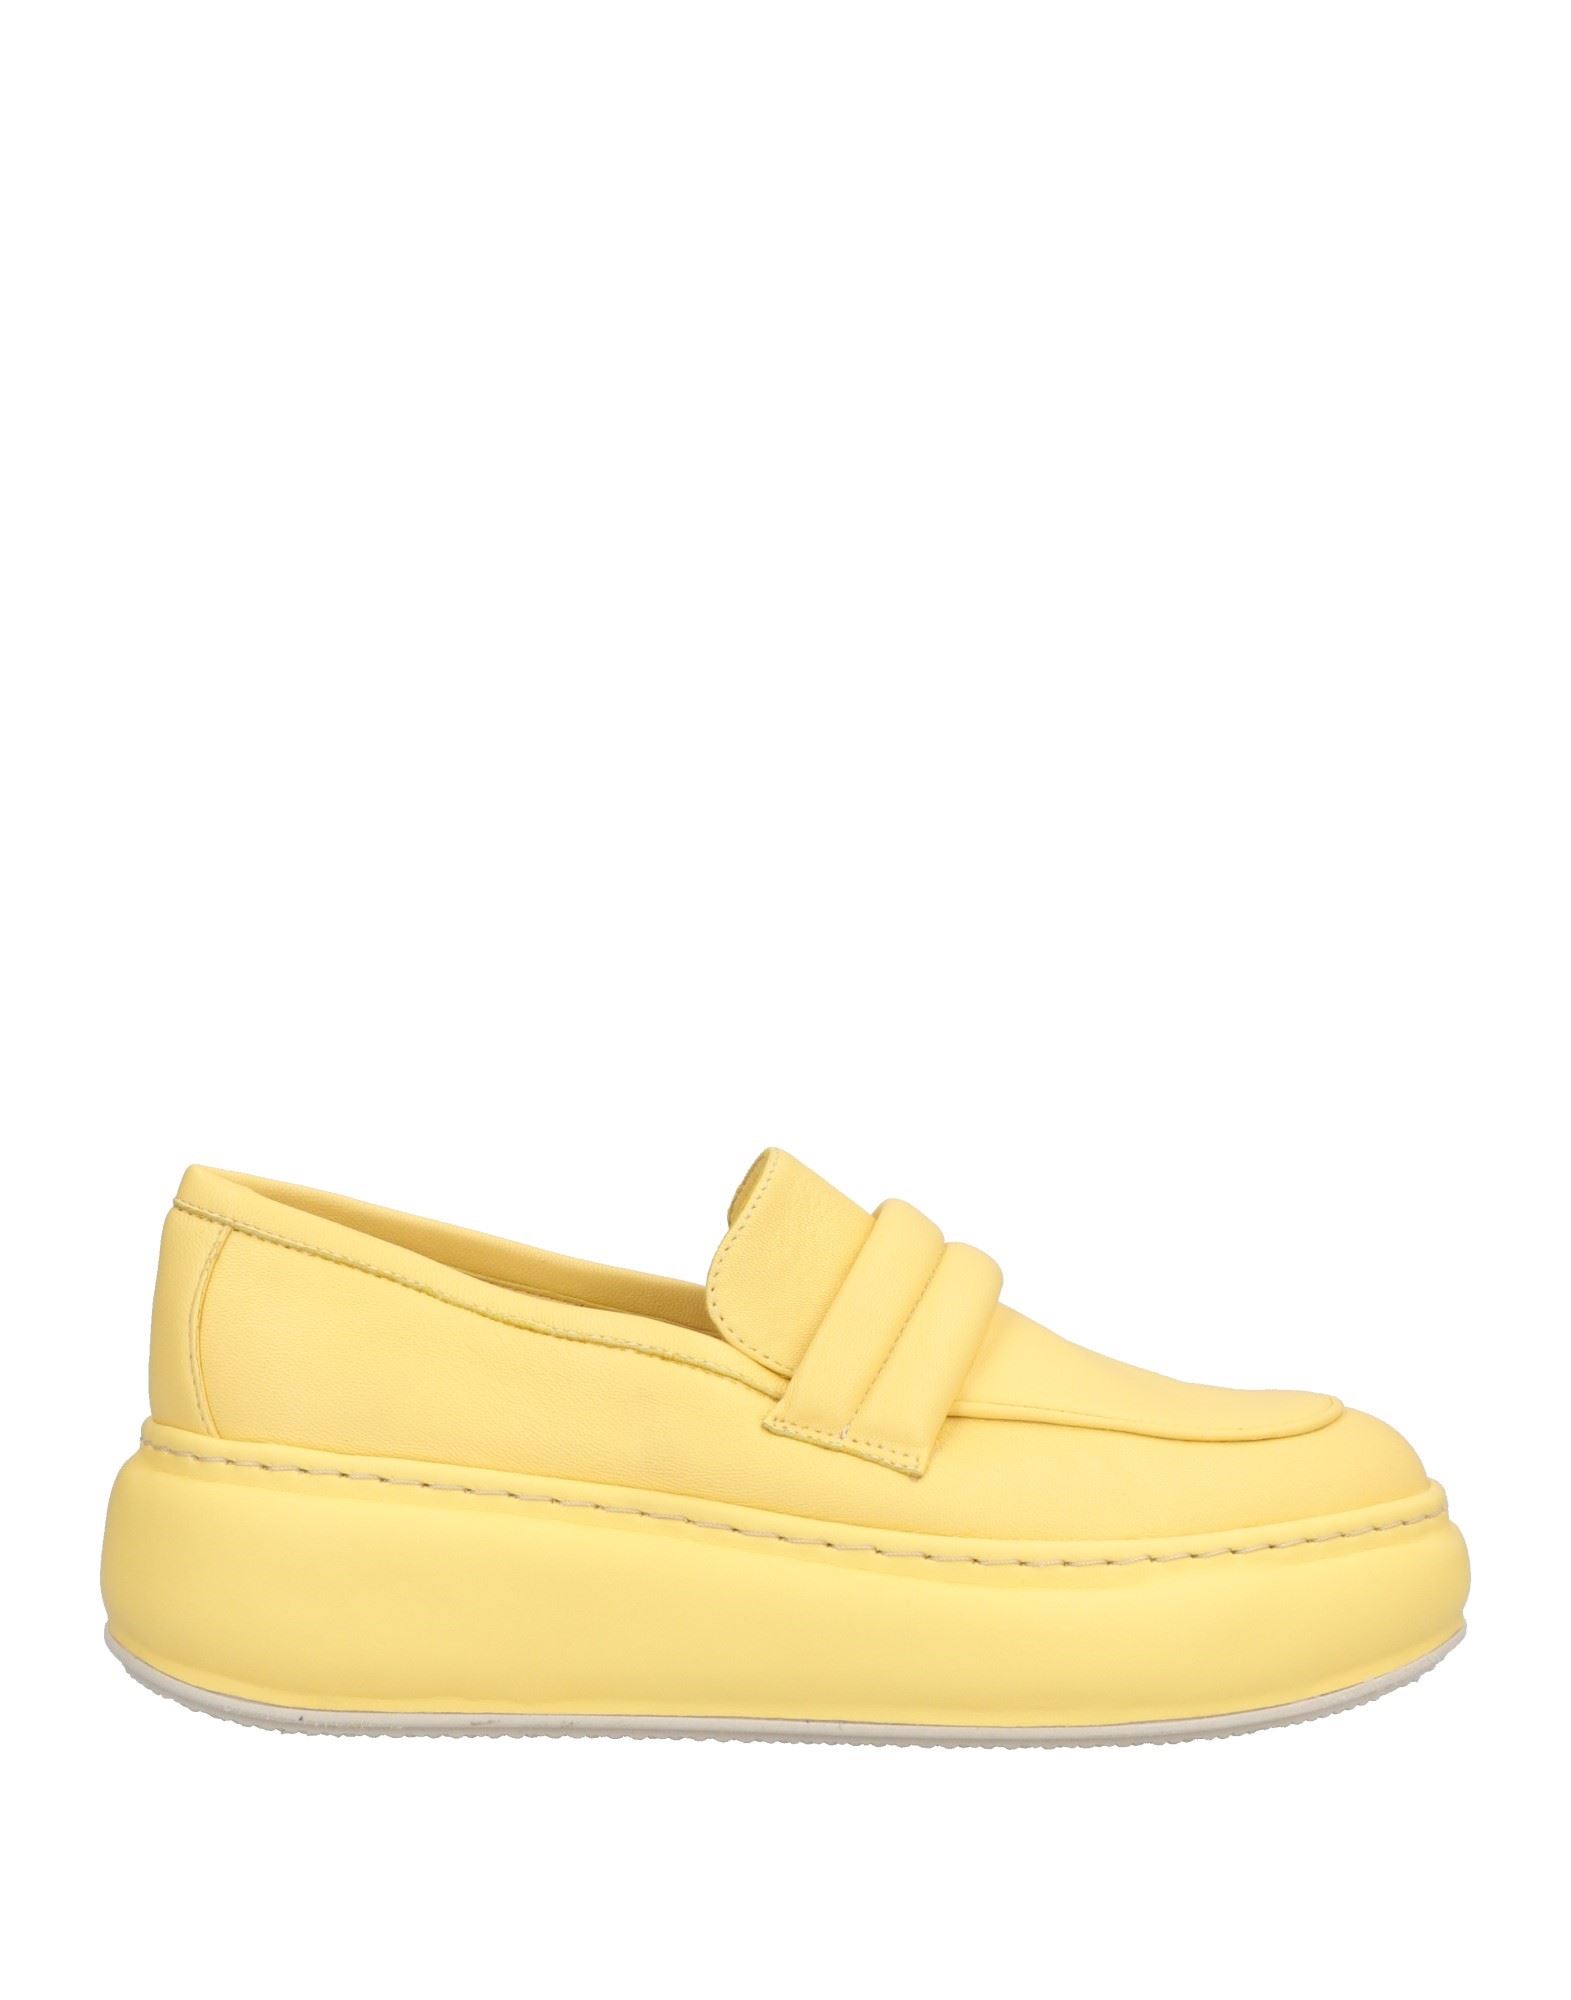 Paola Ferri Loafers In Yellow